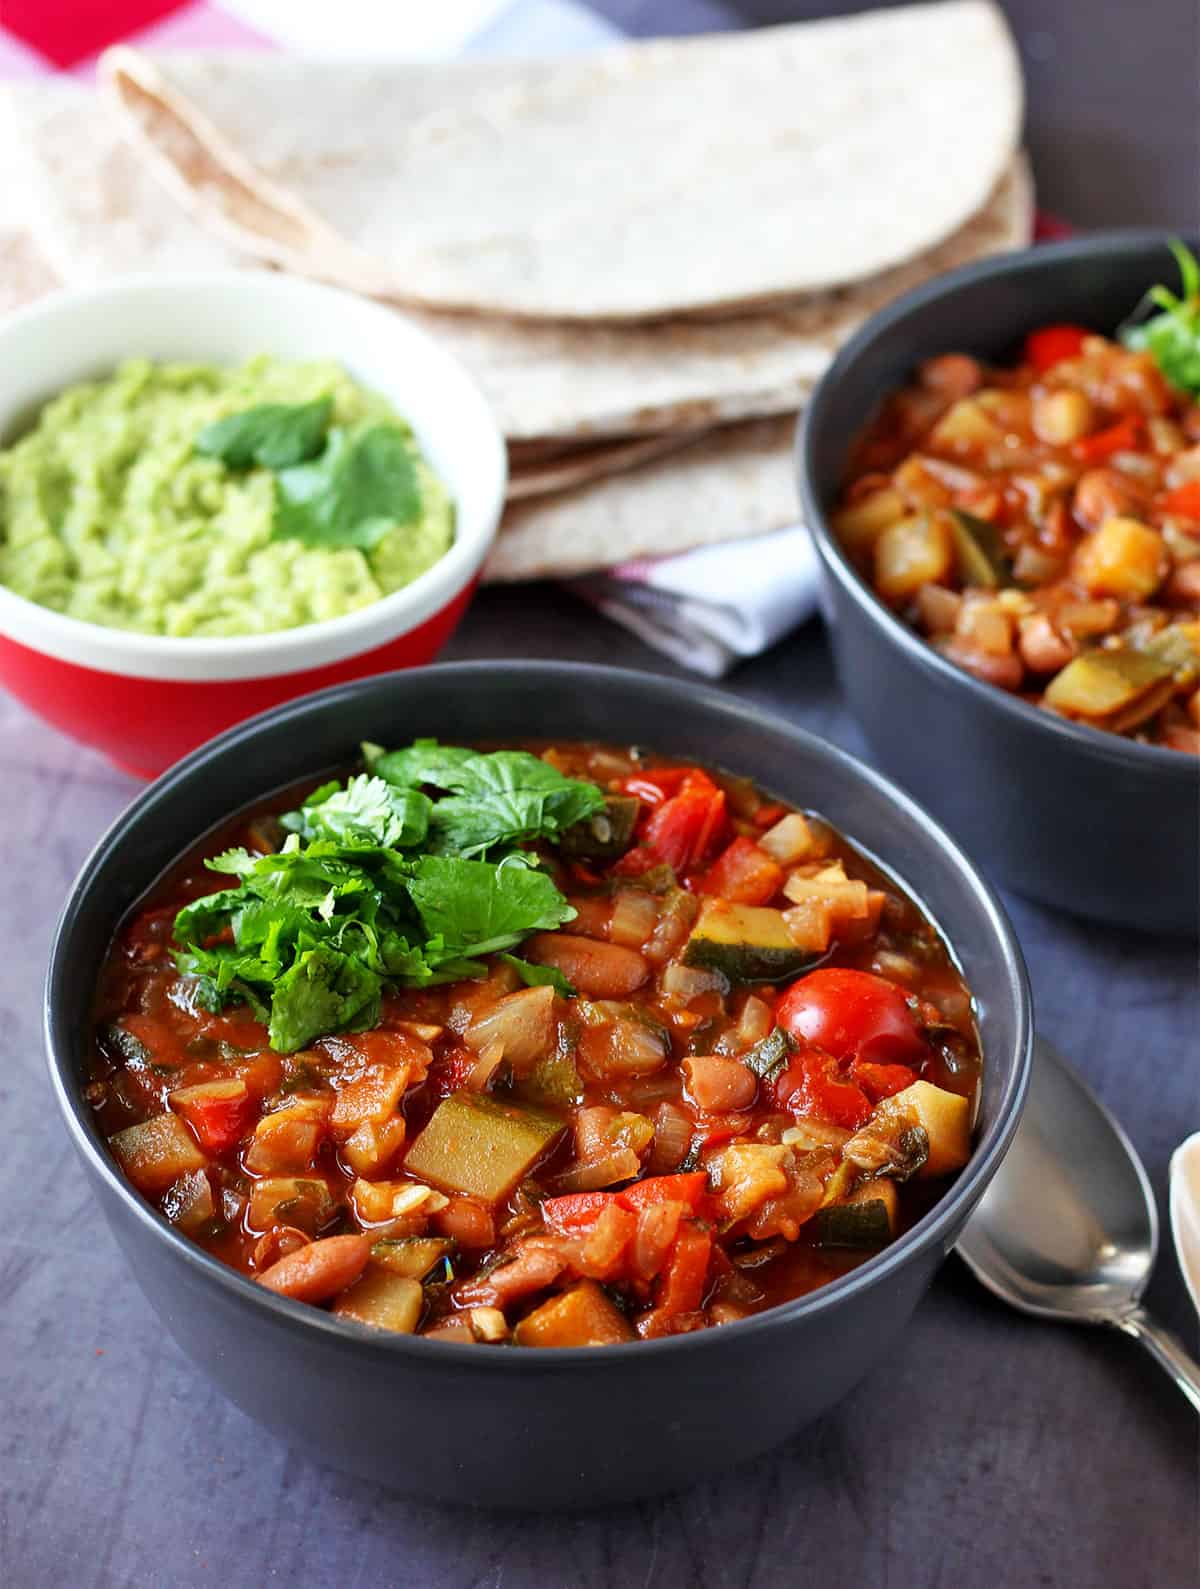 A bowl of zucchini chili with pinto beans and tomatoes with cilantro garnish.